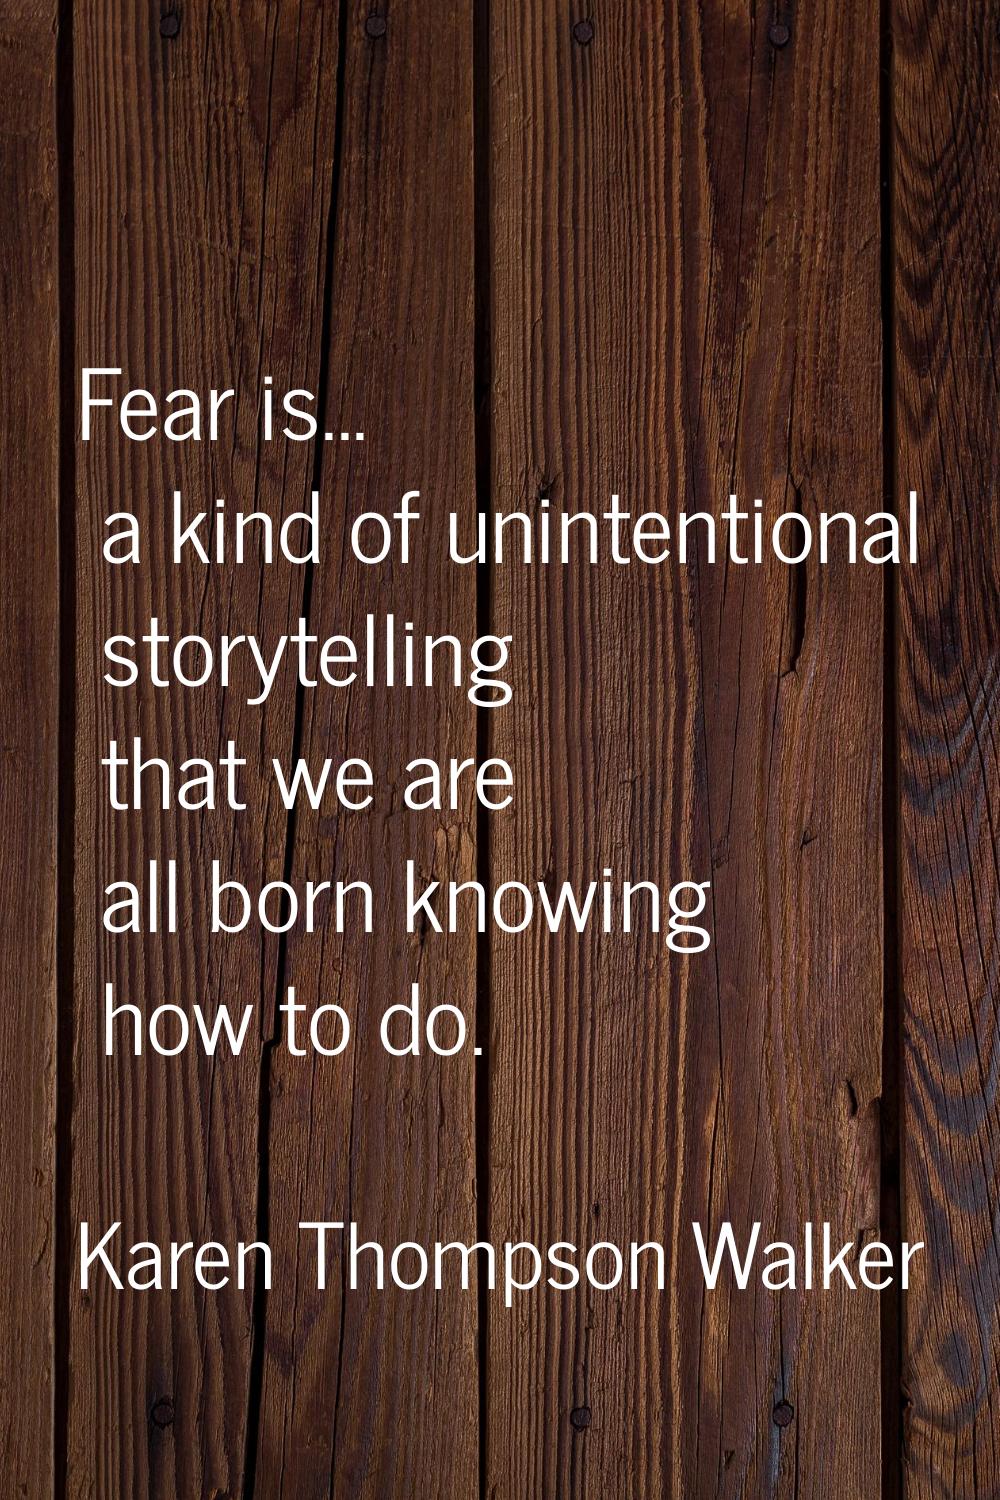 Fear is... a kind of unintentional storytelling that we are all born knowing how to do.